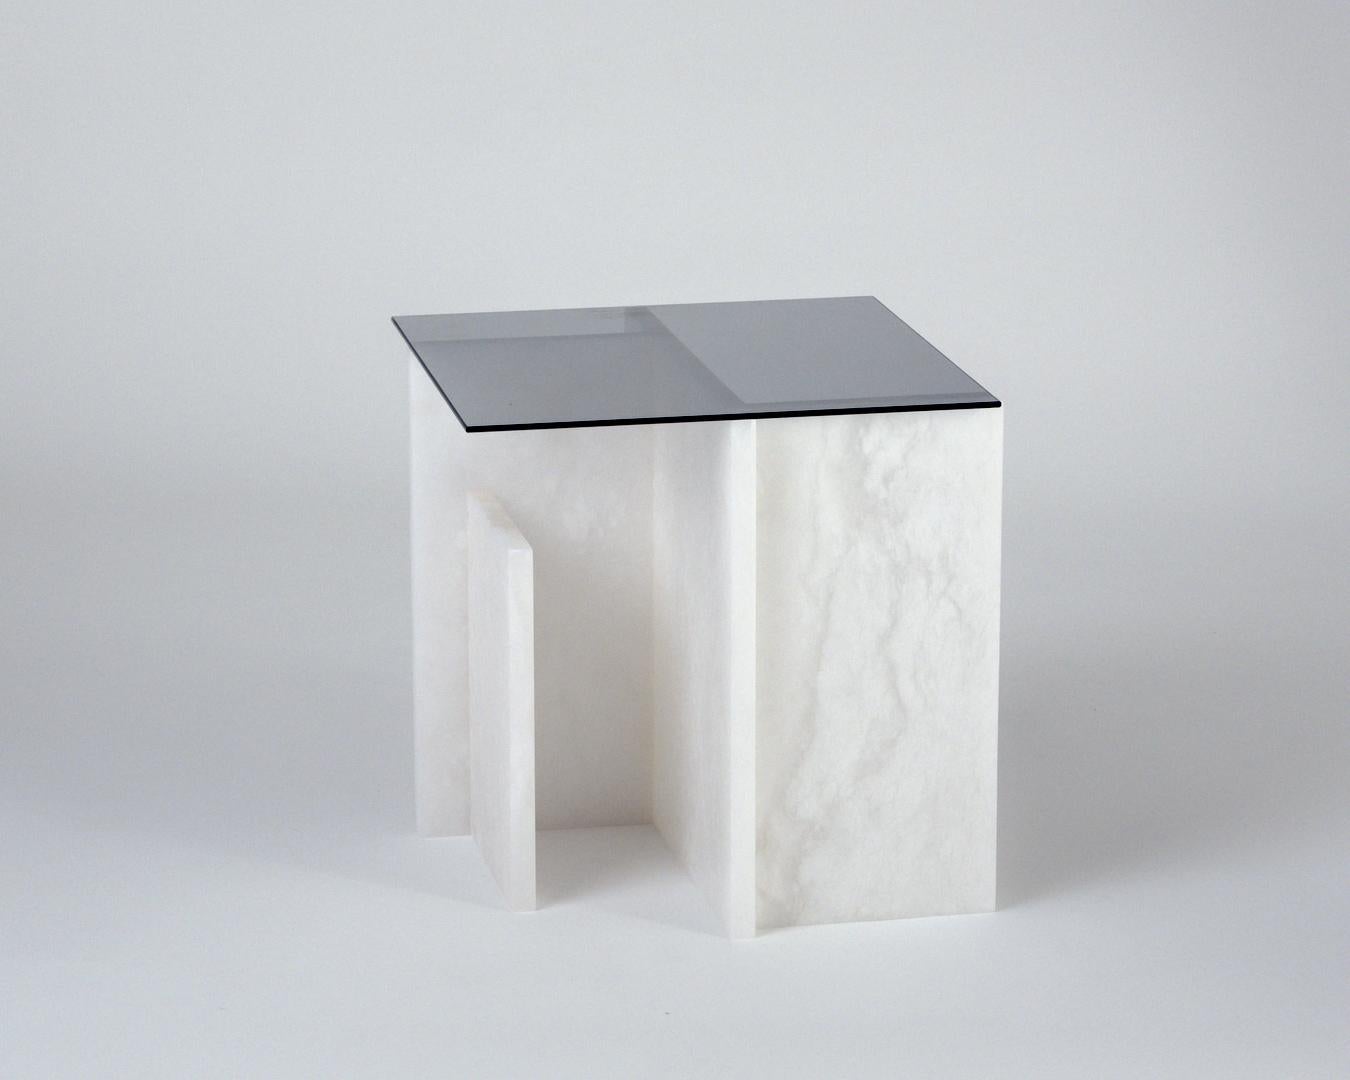 Alabaster table by Owl
Dimensions: D 40 x W 40 x H 40cm
Materials: Solid Alabaster.

Alabaster is an evolving series in which alabaster is shaped into a functional play of vertical, geometric forms. The series has grown from early explorations